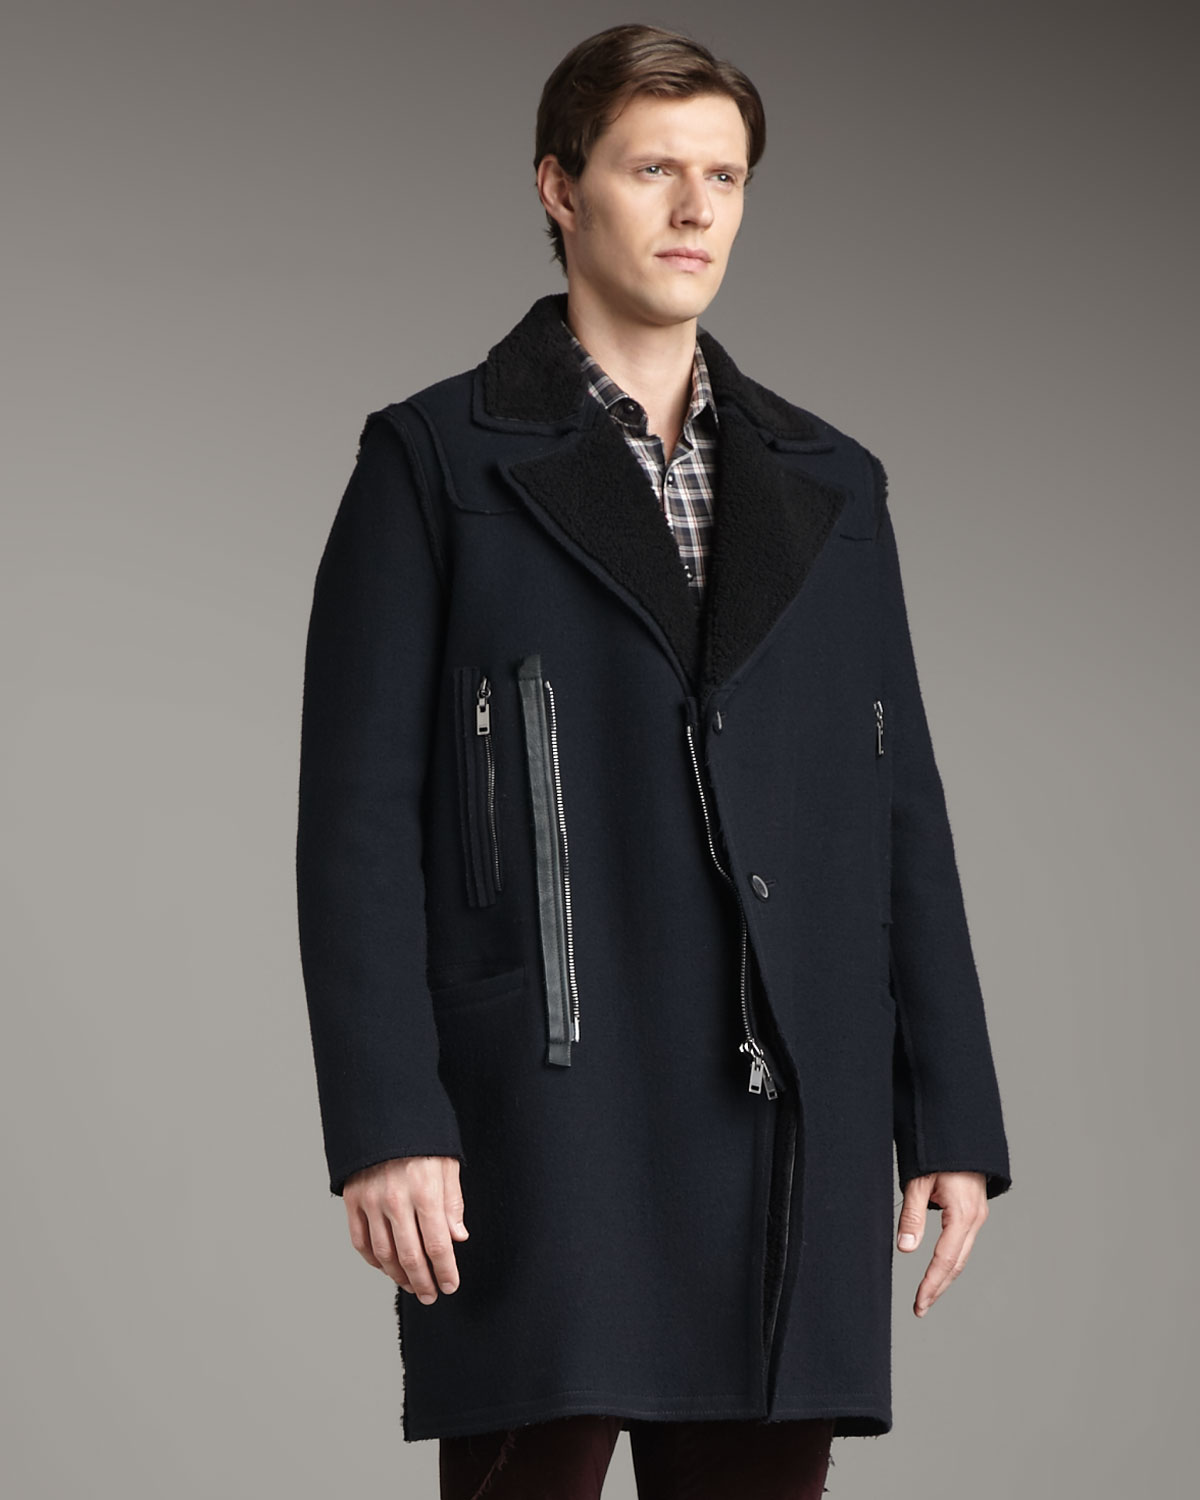 Lyst - Lanvin Wool and Shearling Pea Coat in Blue for Men